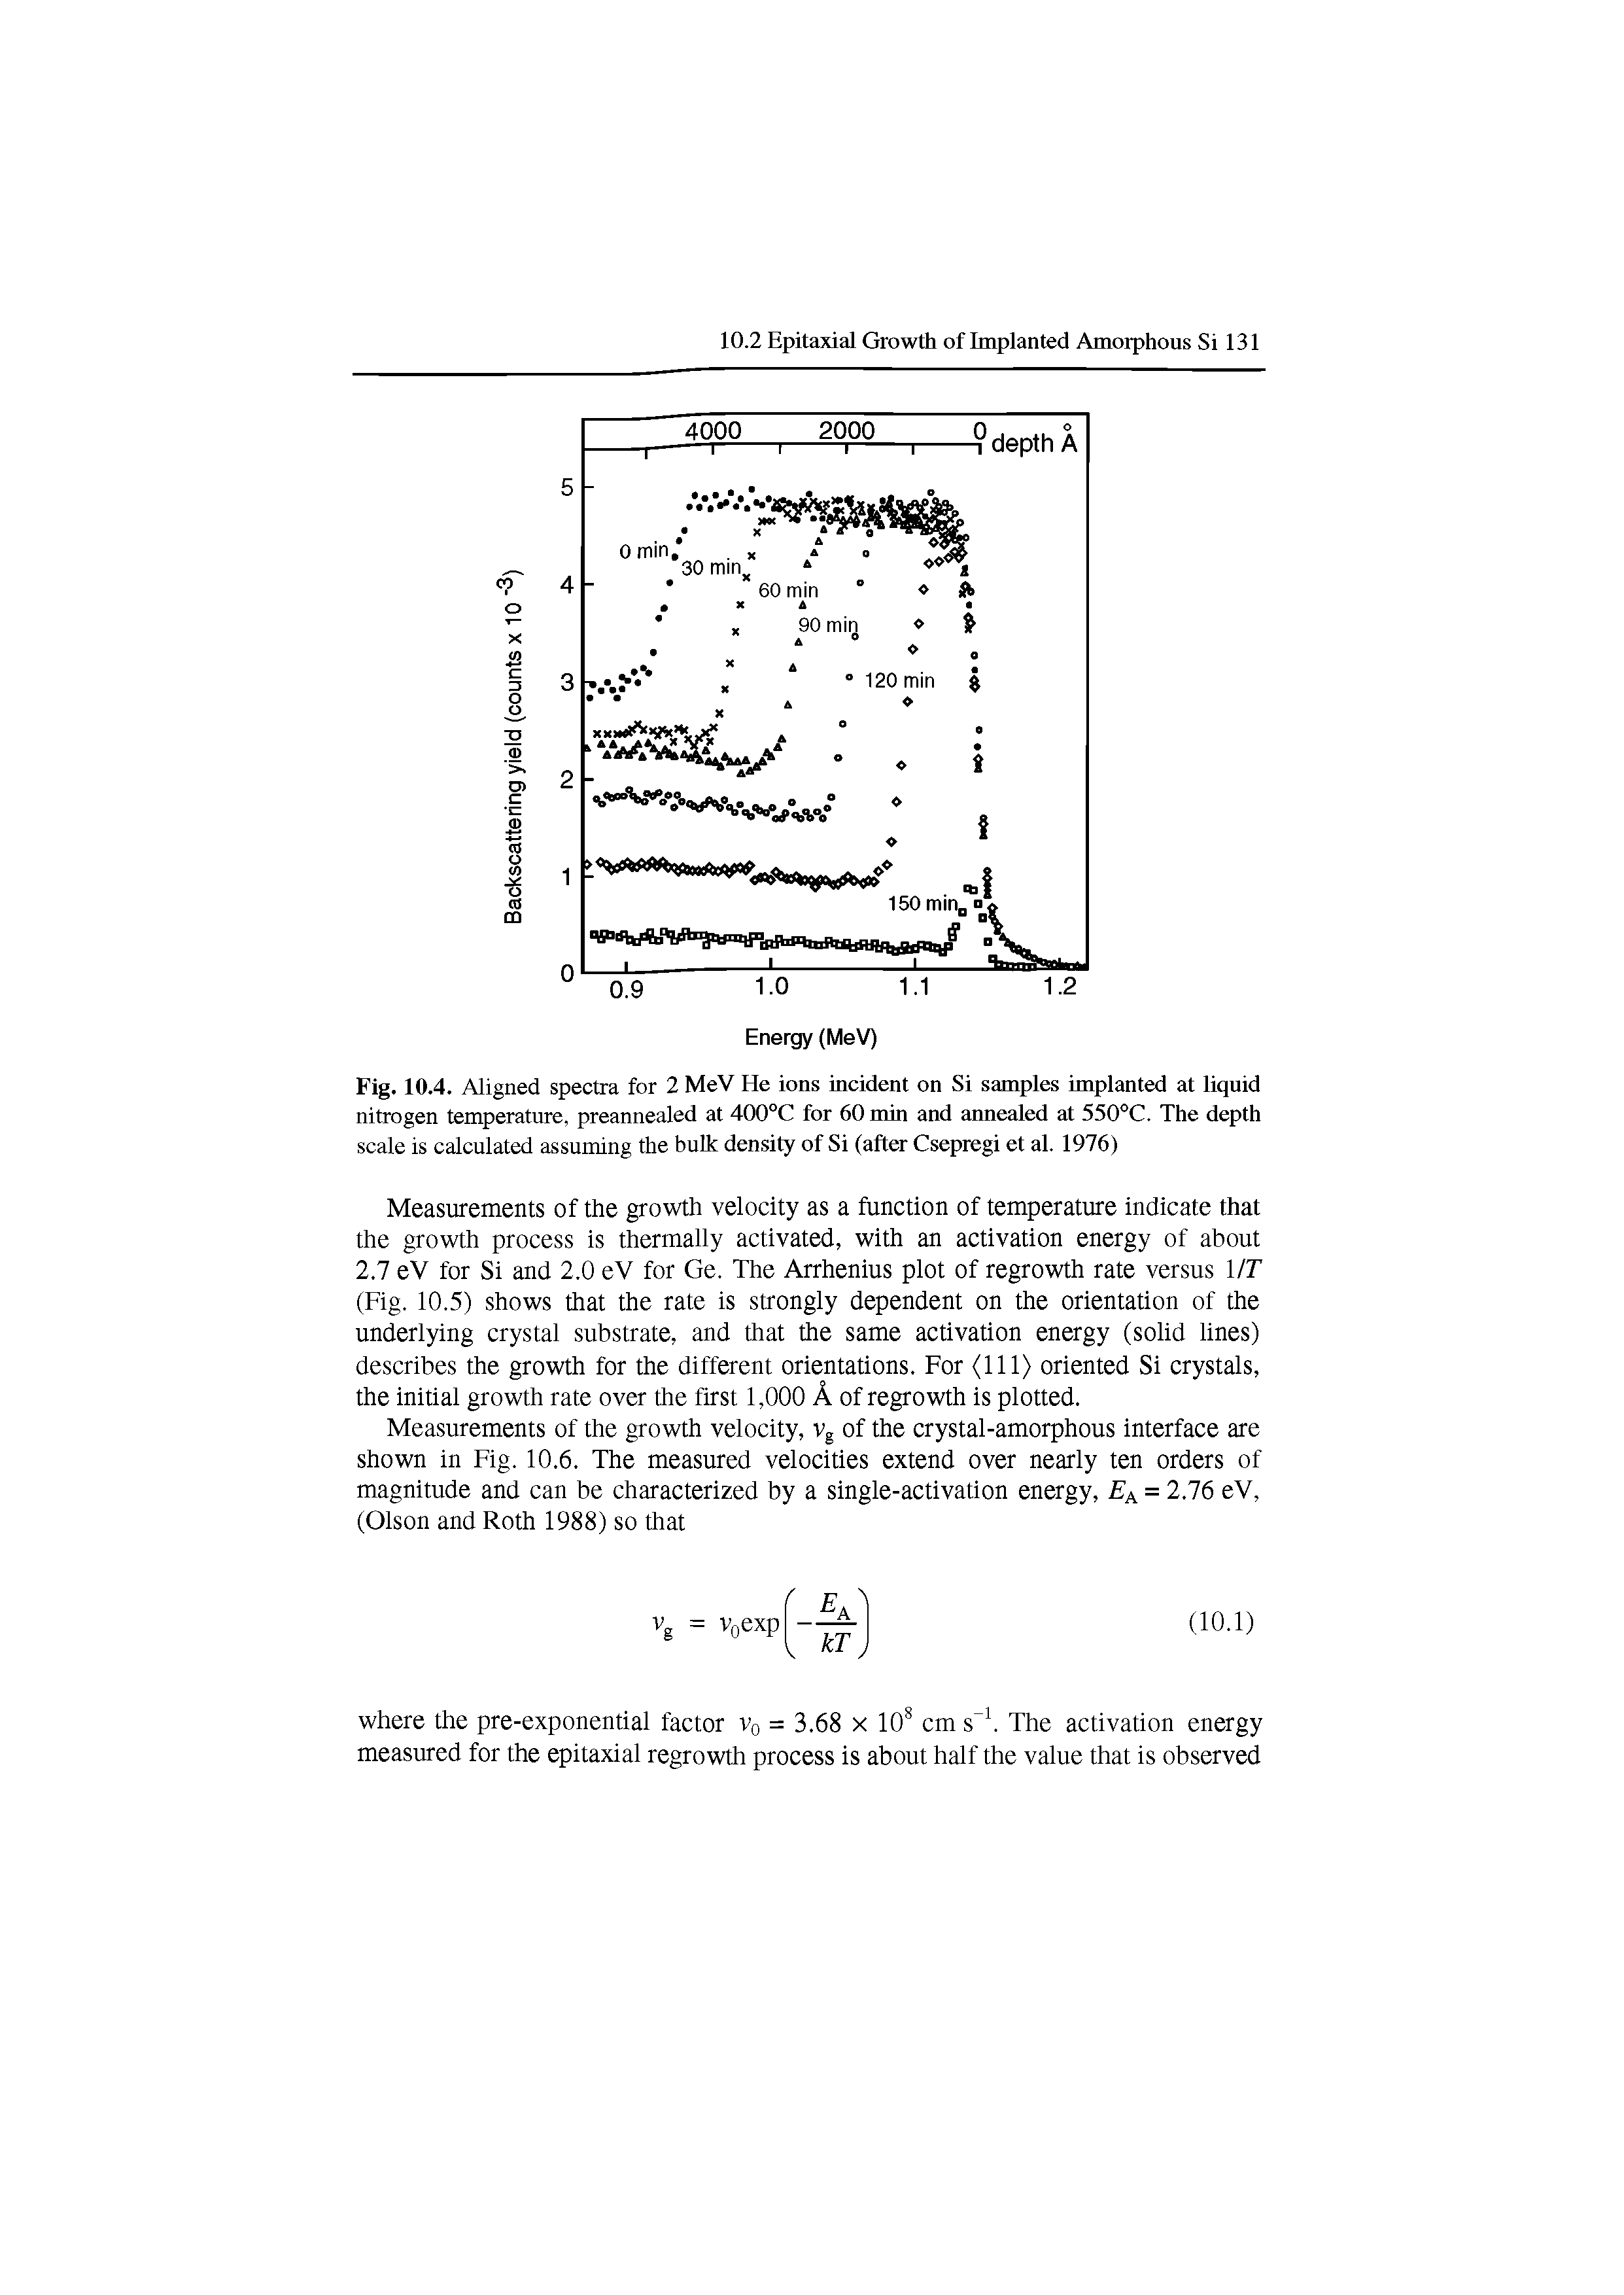 Fig. 10.4. Aligned spectra for 2 MeV He ions incident on Si samples implanted at liquid nitrogen temperature, preannealed at 400°C for 60 min and annealed at 550°C. The depth scale is calculated assuming the bulk density of Si (after Csepregi et al. 1976)...